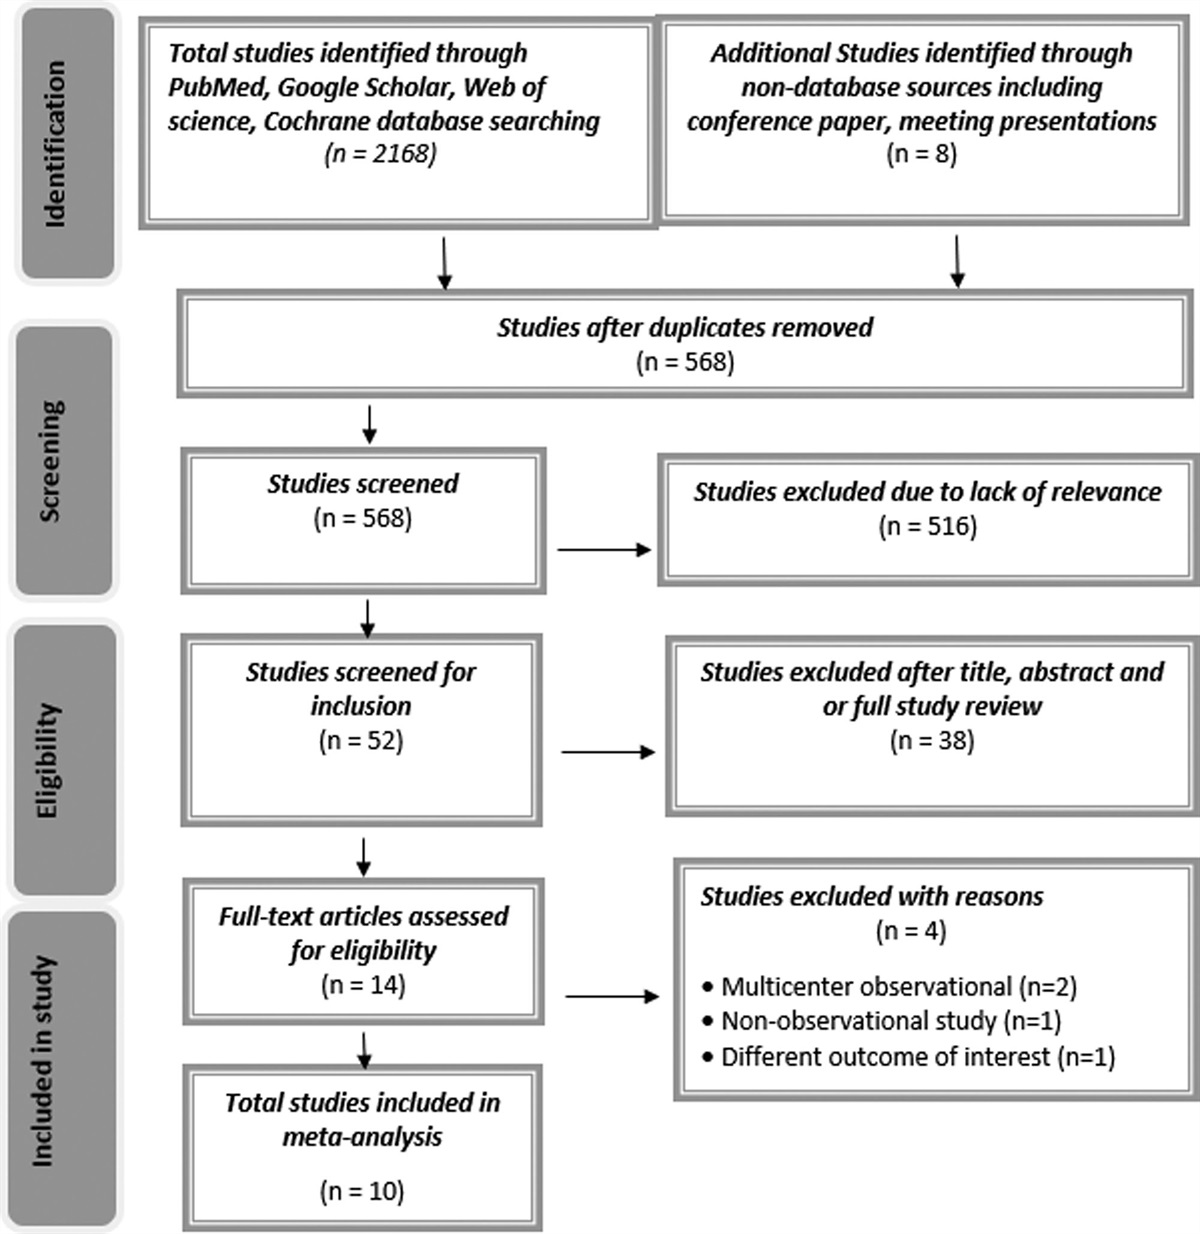 Safety outcomes of sodium-glucose cotransporter-2 inhibitors in patients with type 2 diabetes and other risk factors for cardiovascular disease: a systematic review and meta-analysis